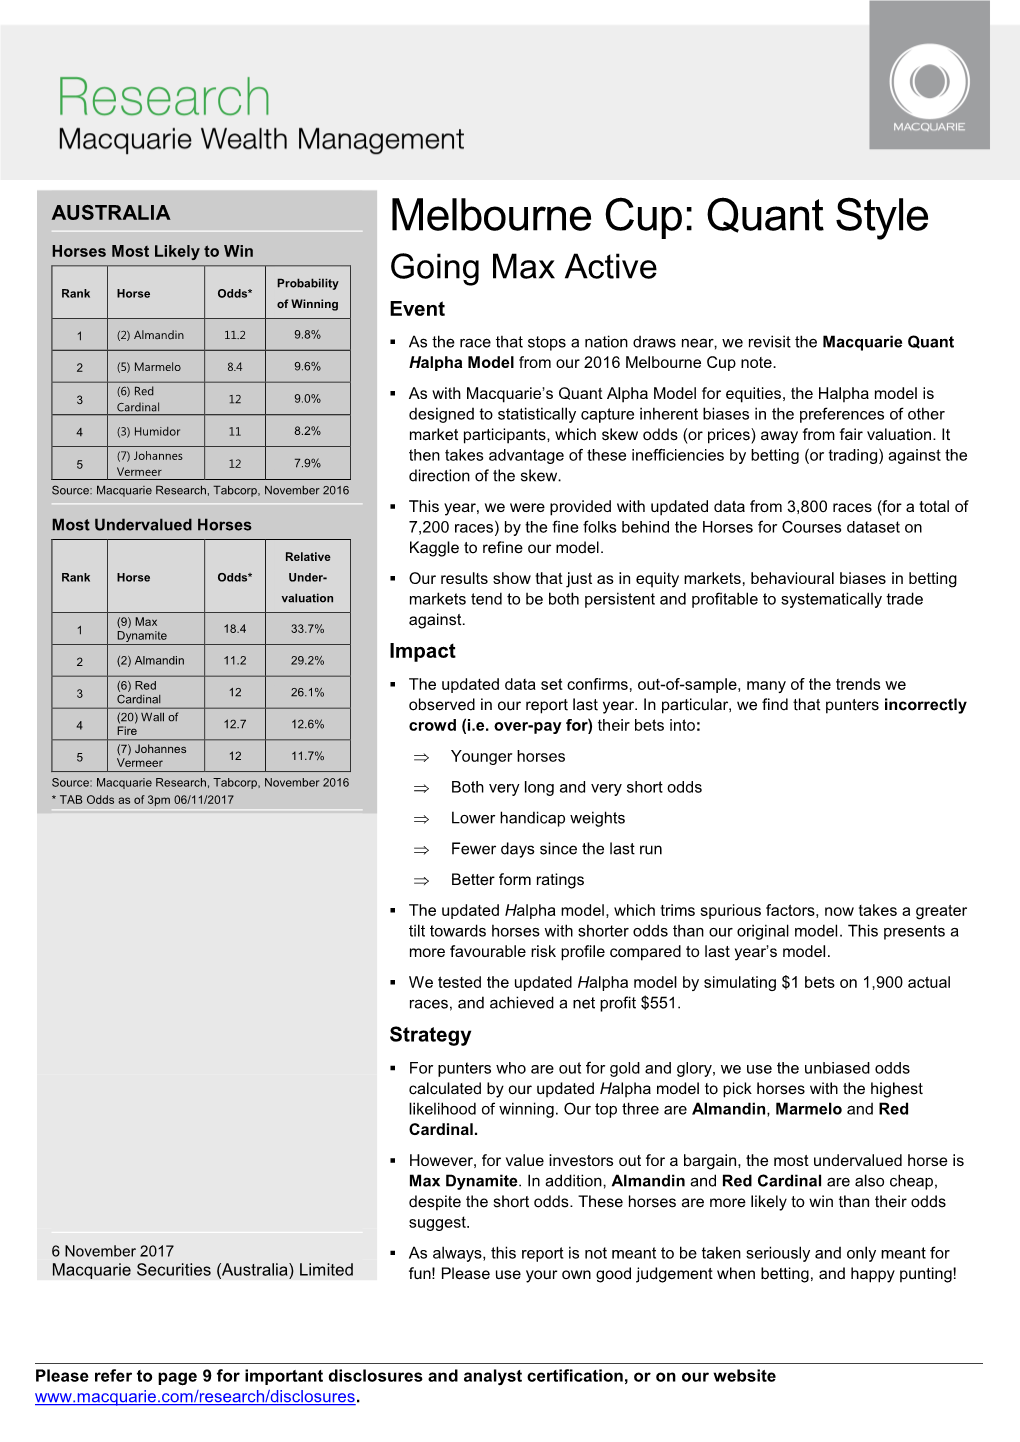 Macquarie Melbourne Cup Analysis 2017